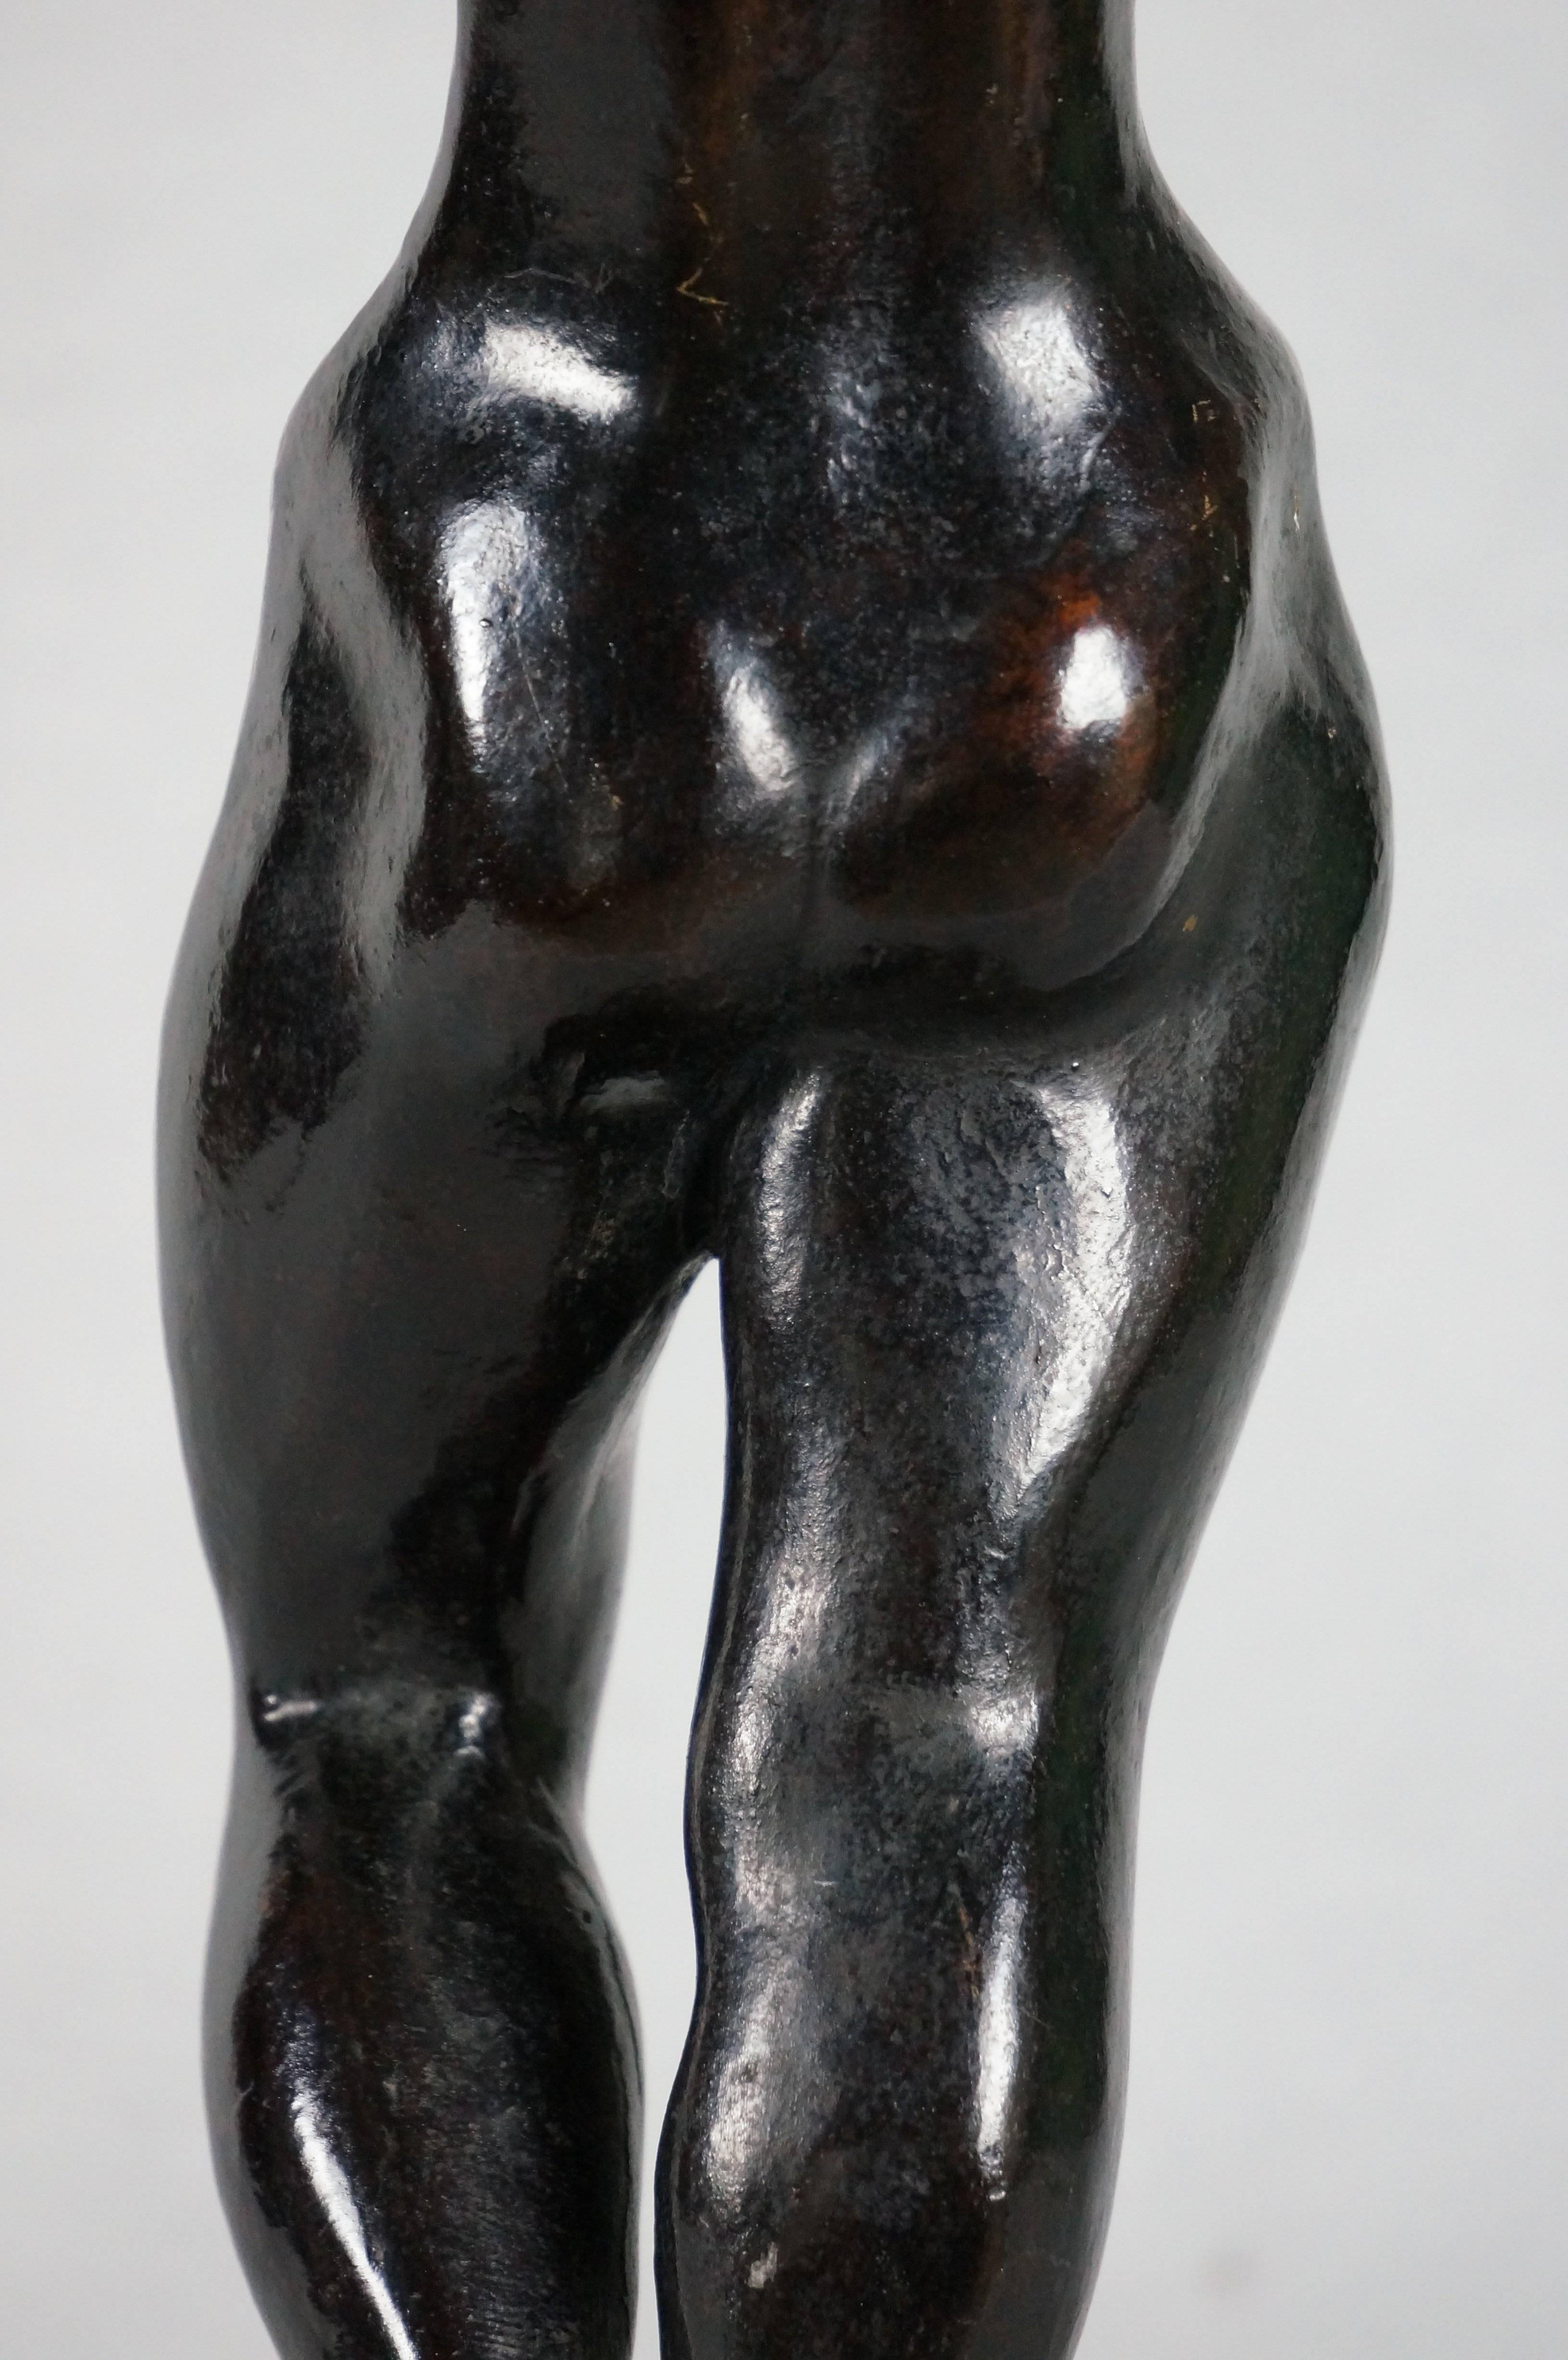 Maternity, 1960-70 - bronze, 44x13 cm - Contemporary Sculpture by Philippe Asselin